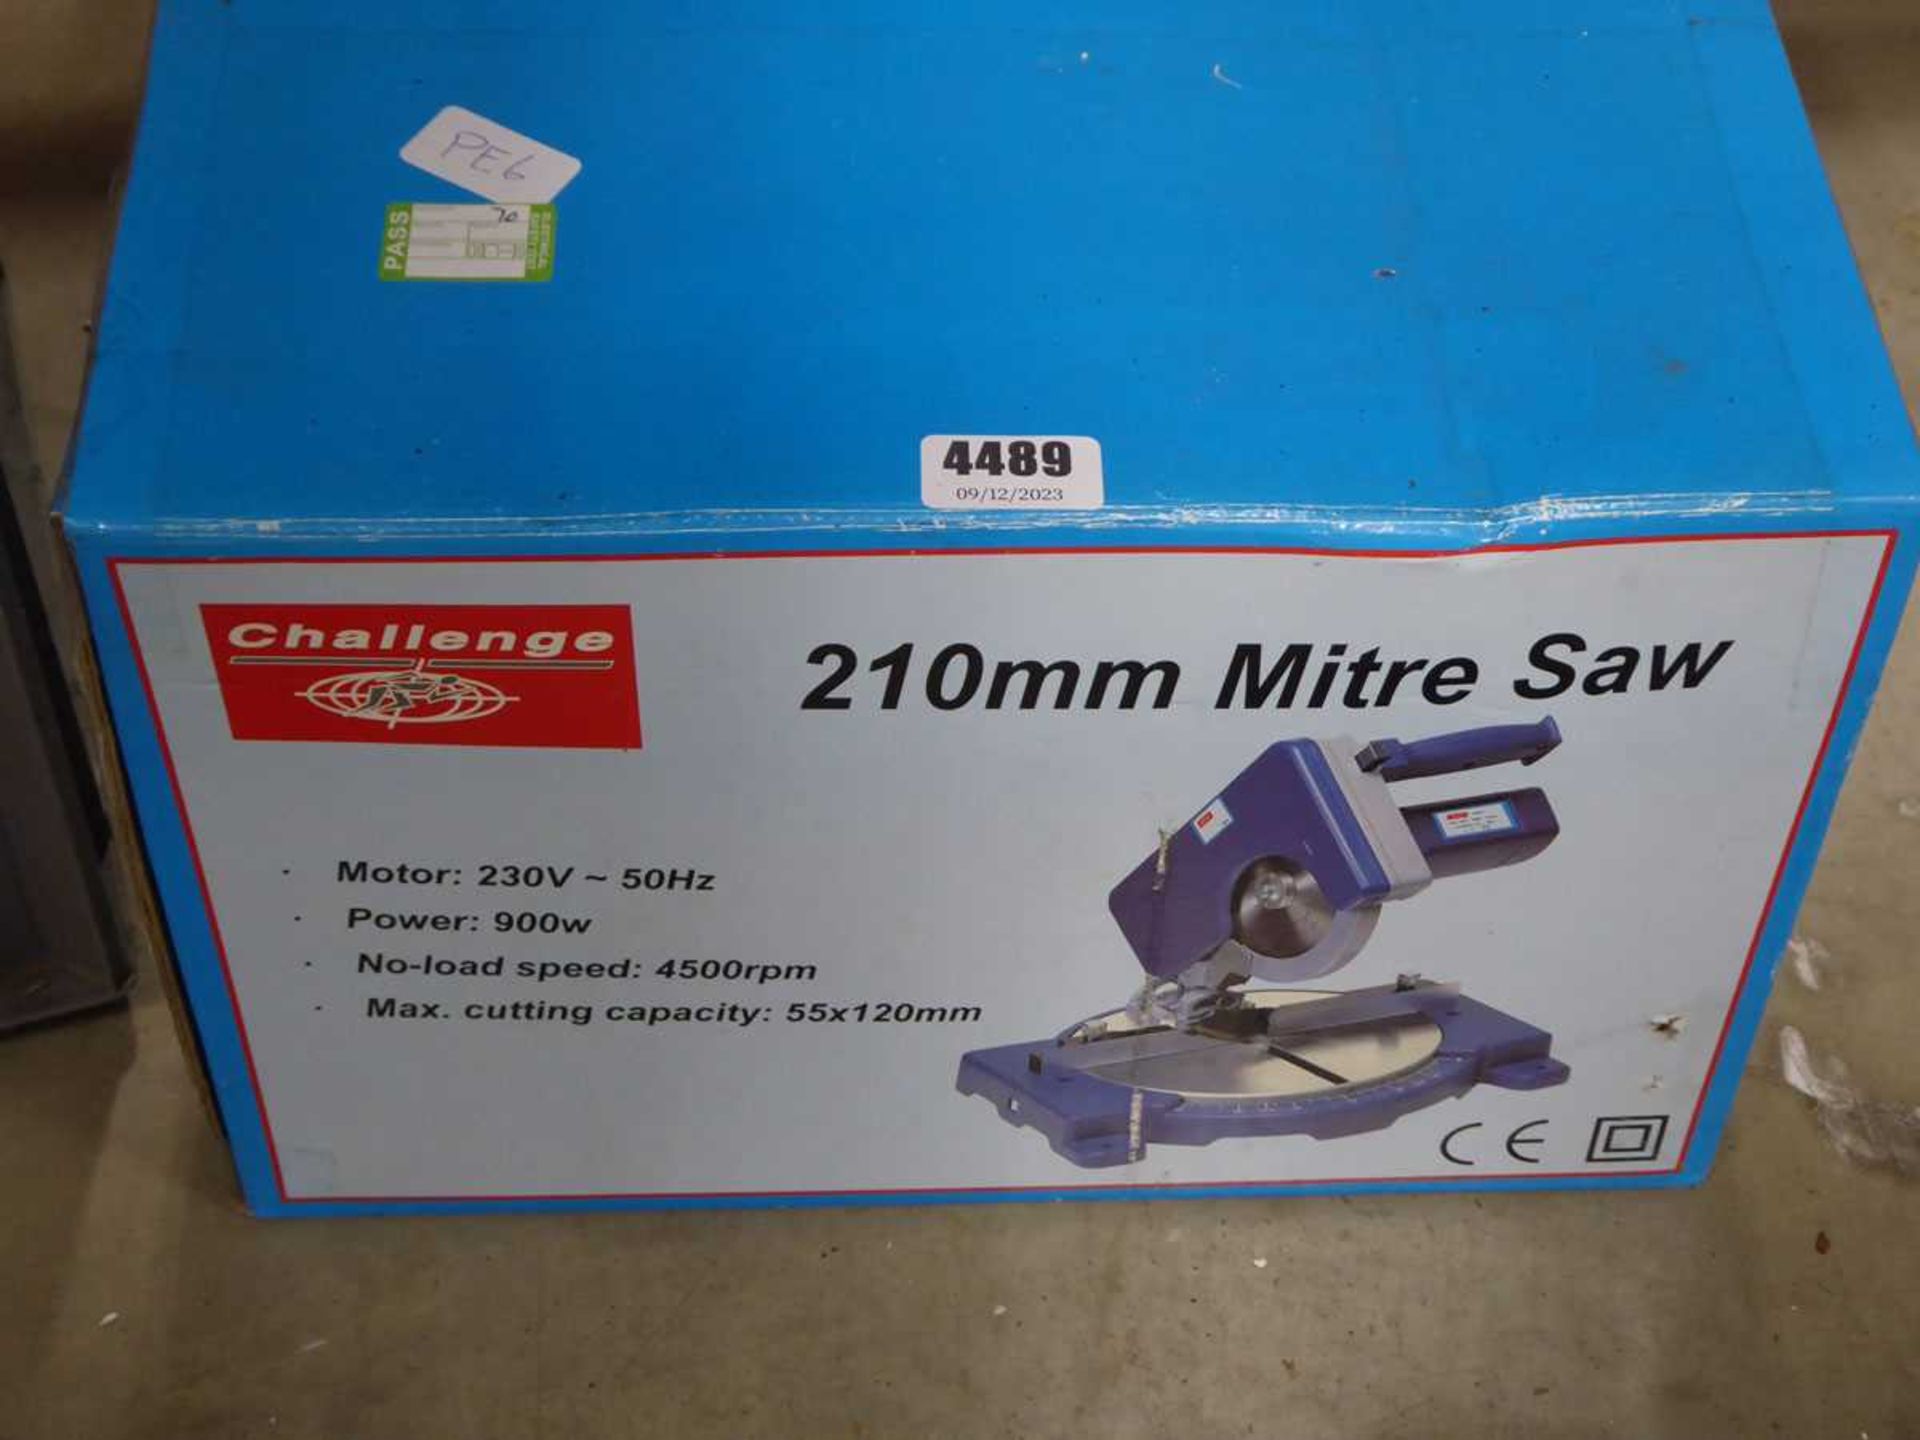 Boxed Challenge mitre saw